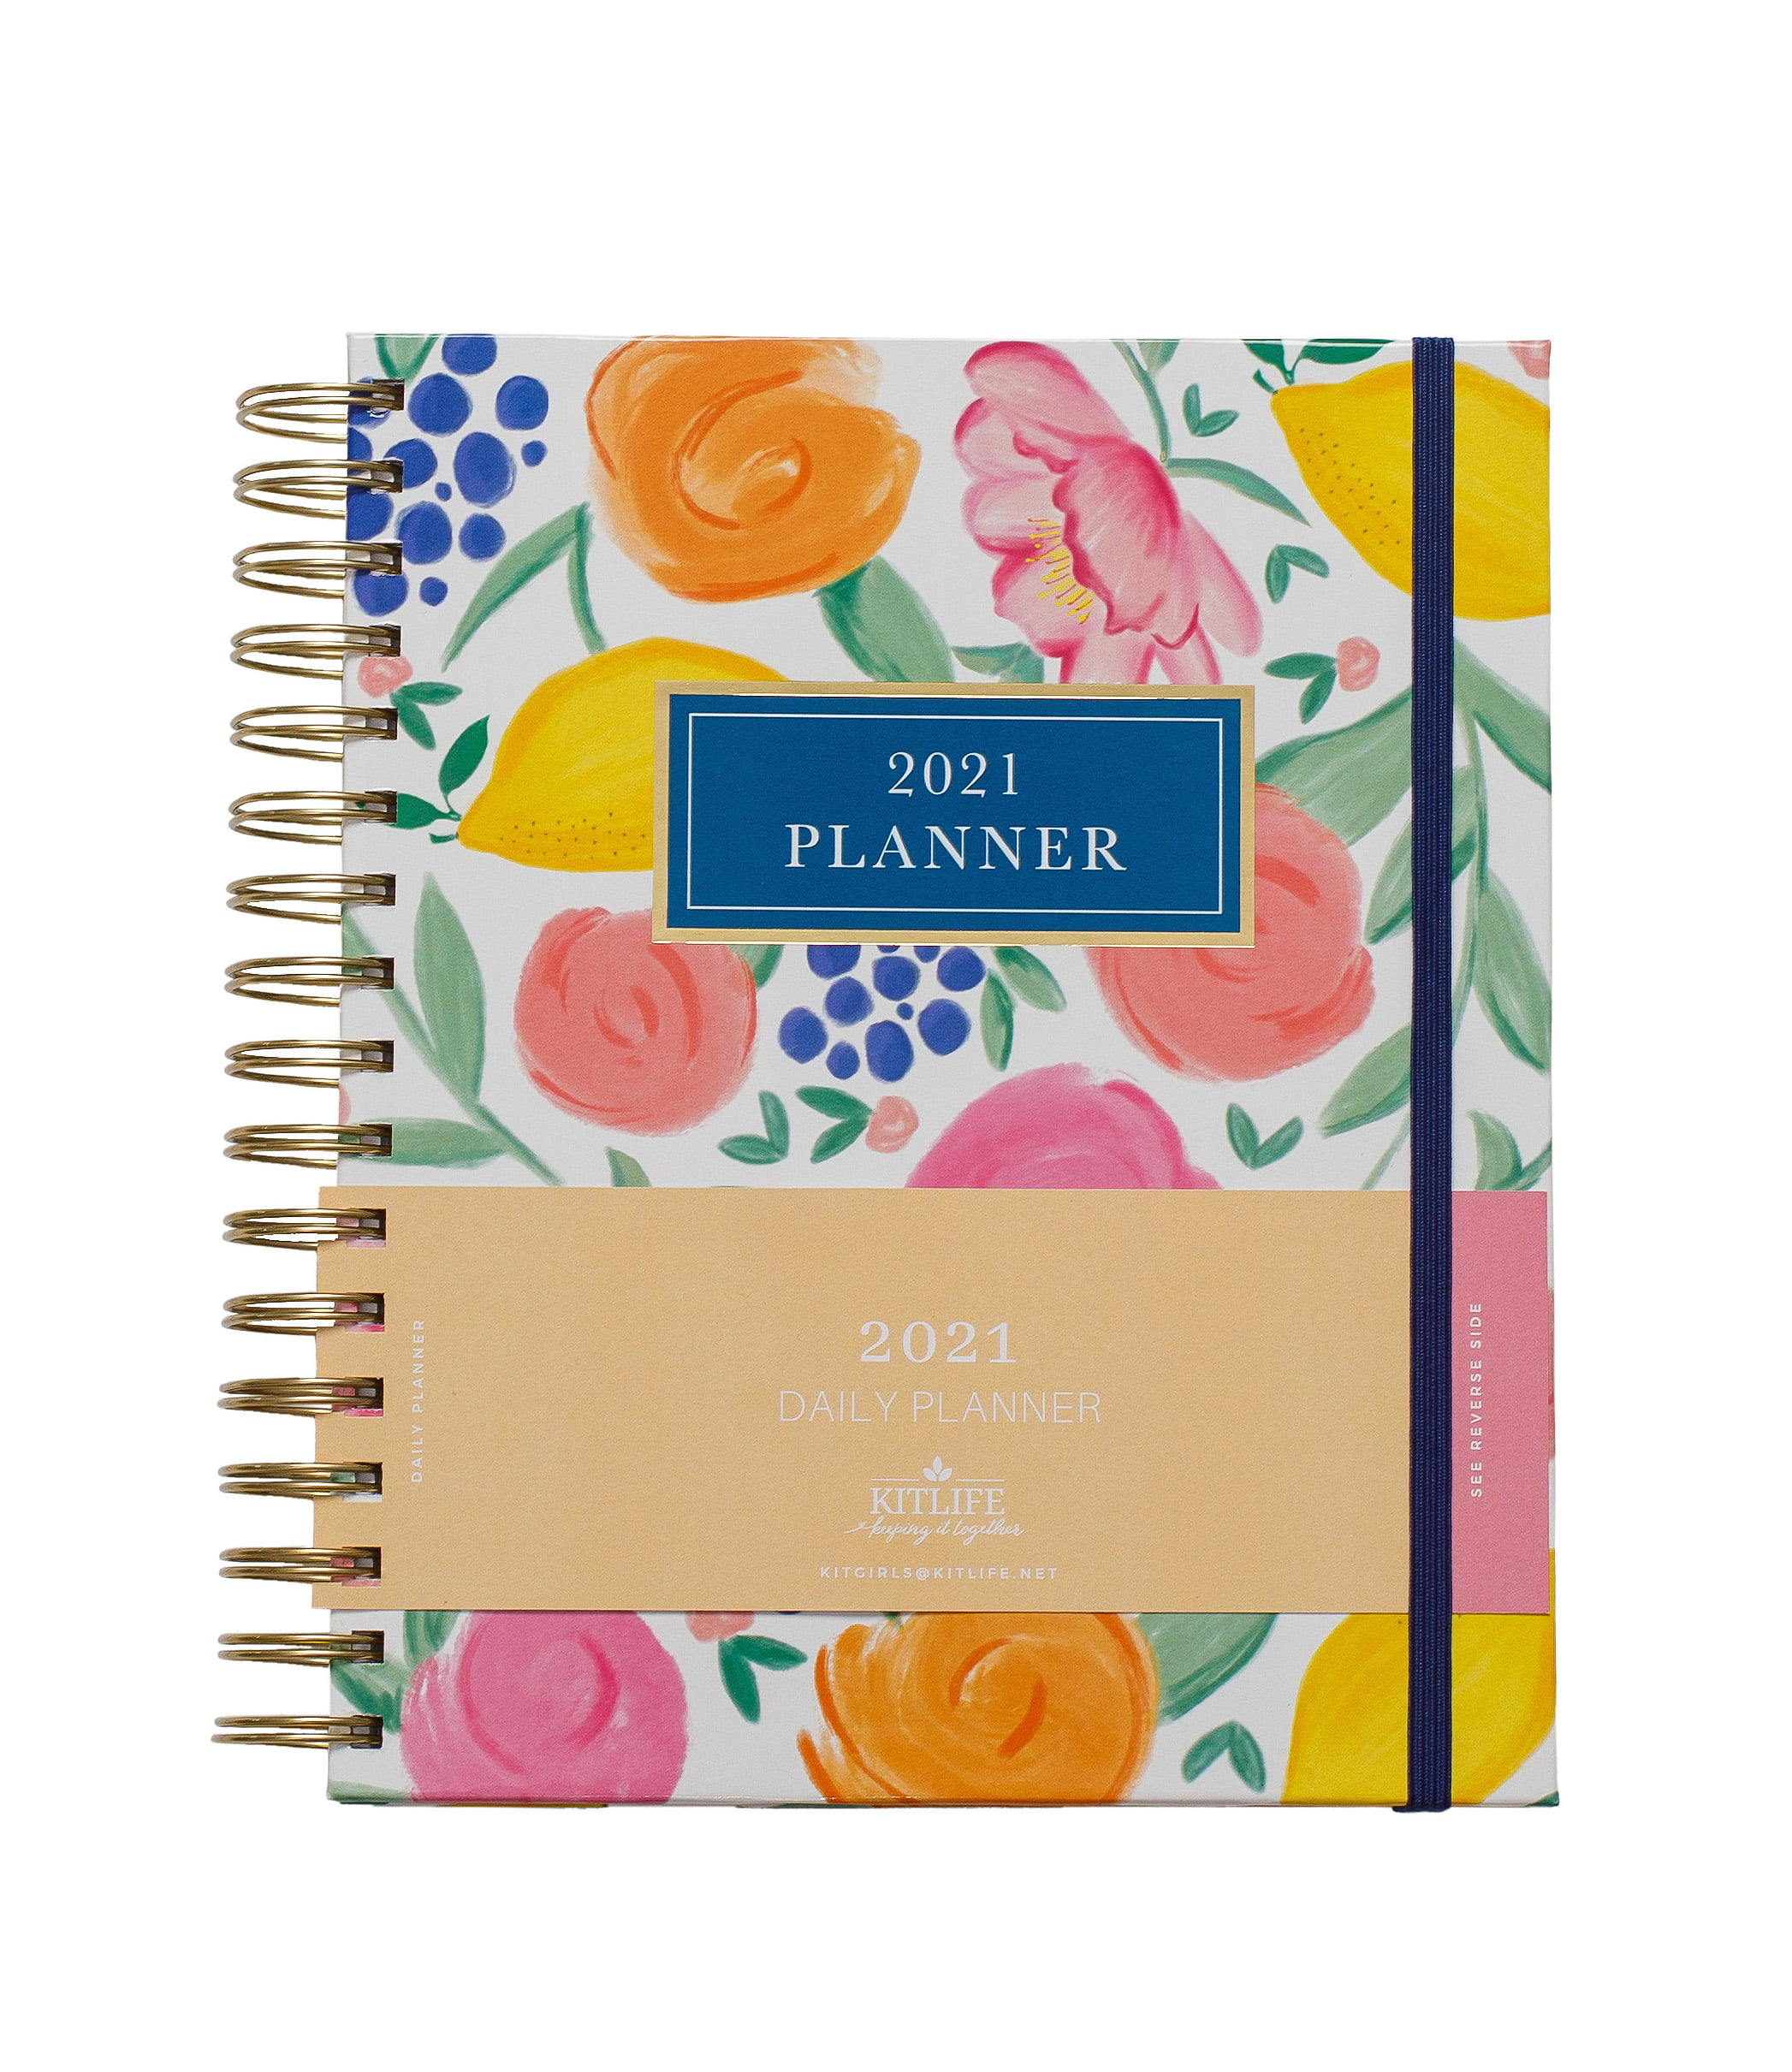 Agenda Planner Organizer 2021 Daily Weekly Monthly Schedule Appointment Book New 